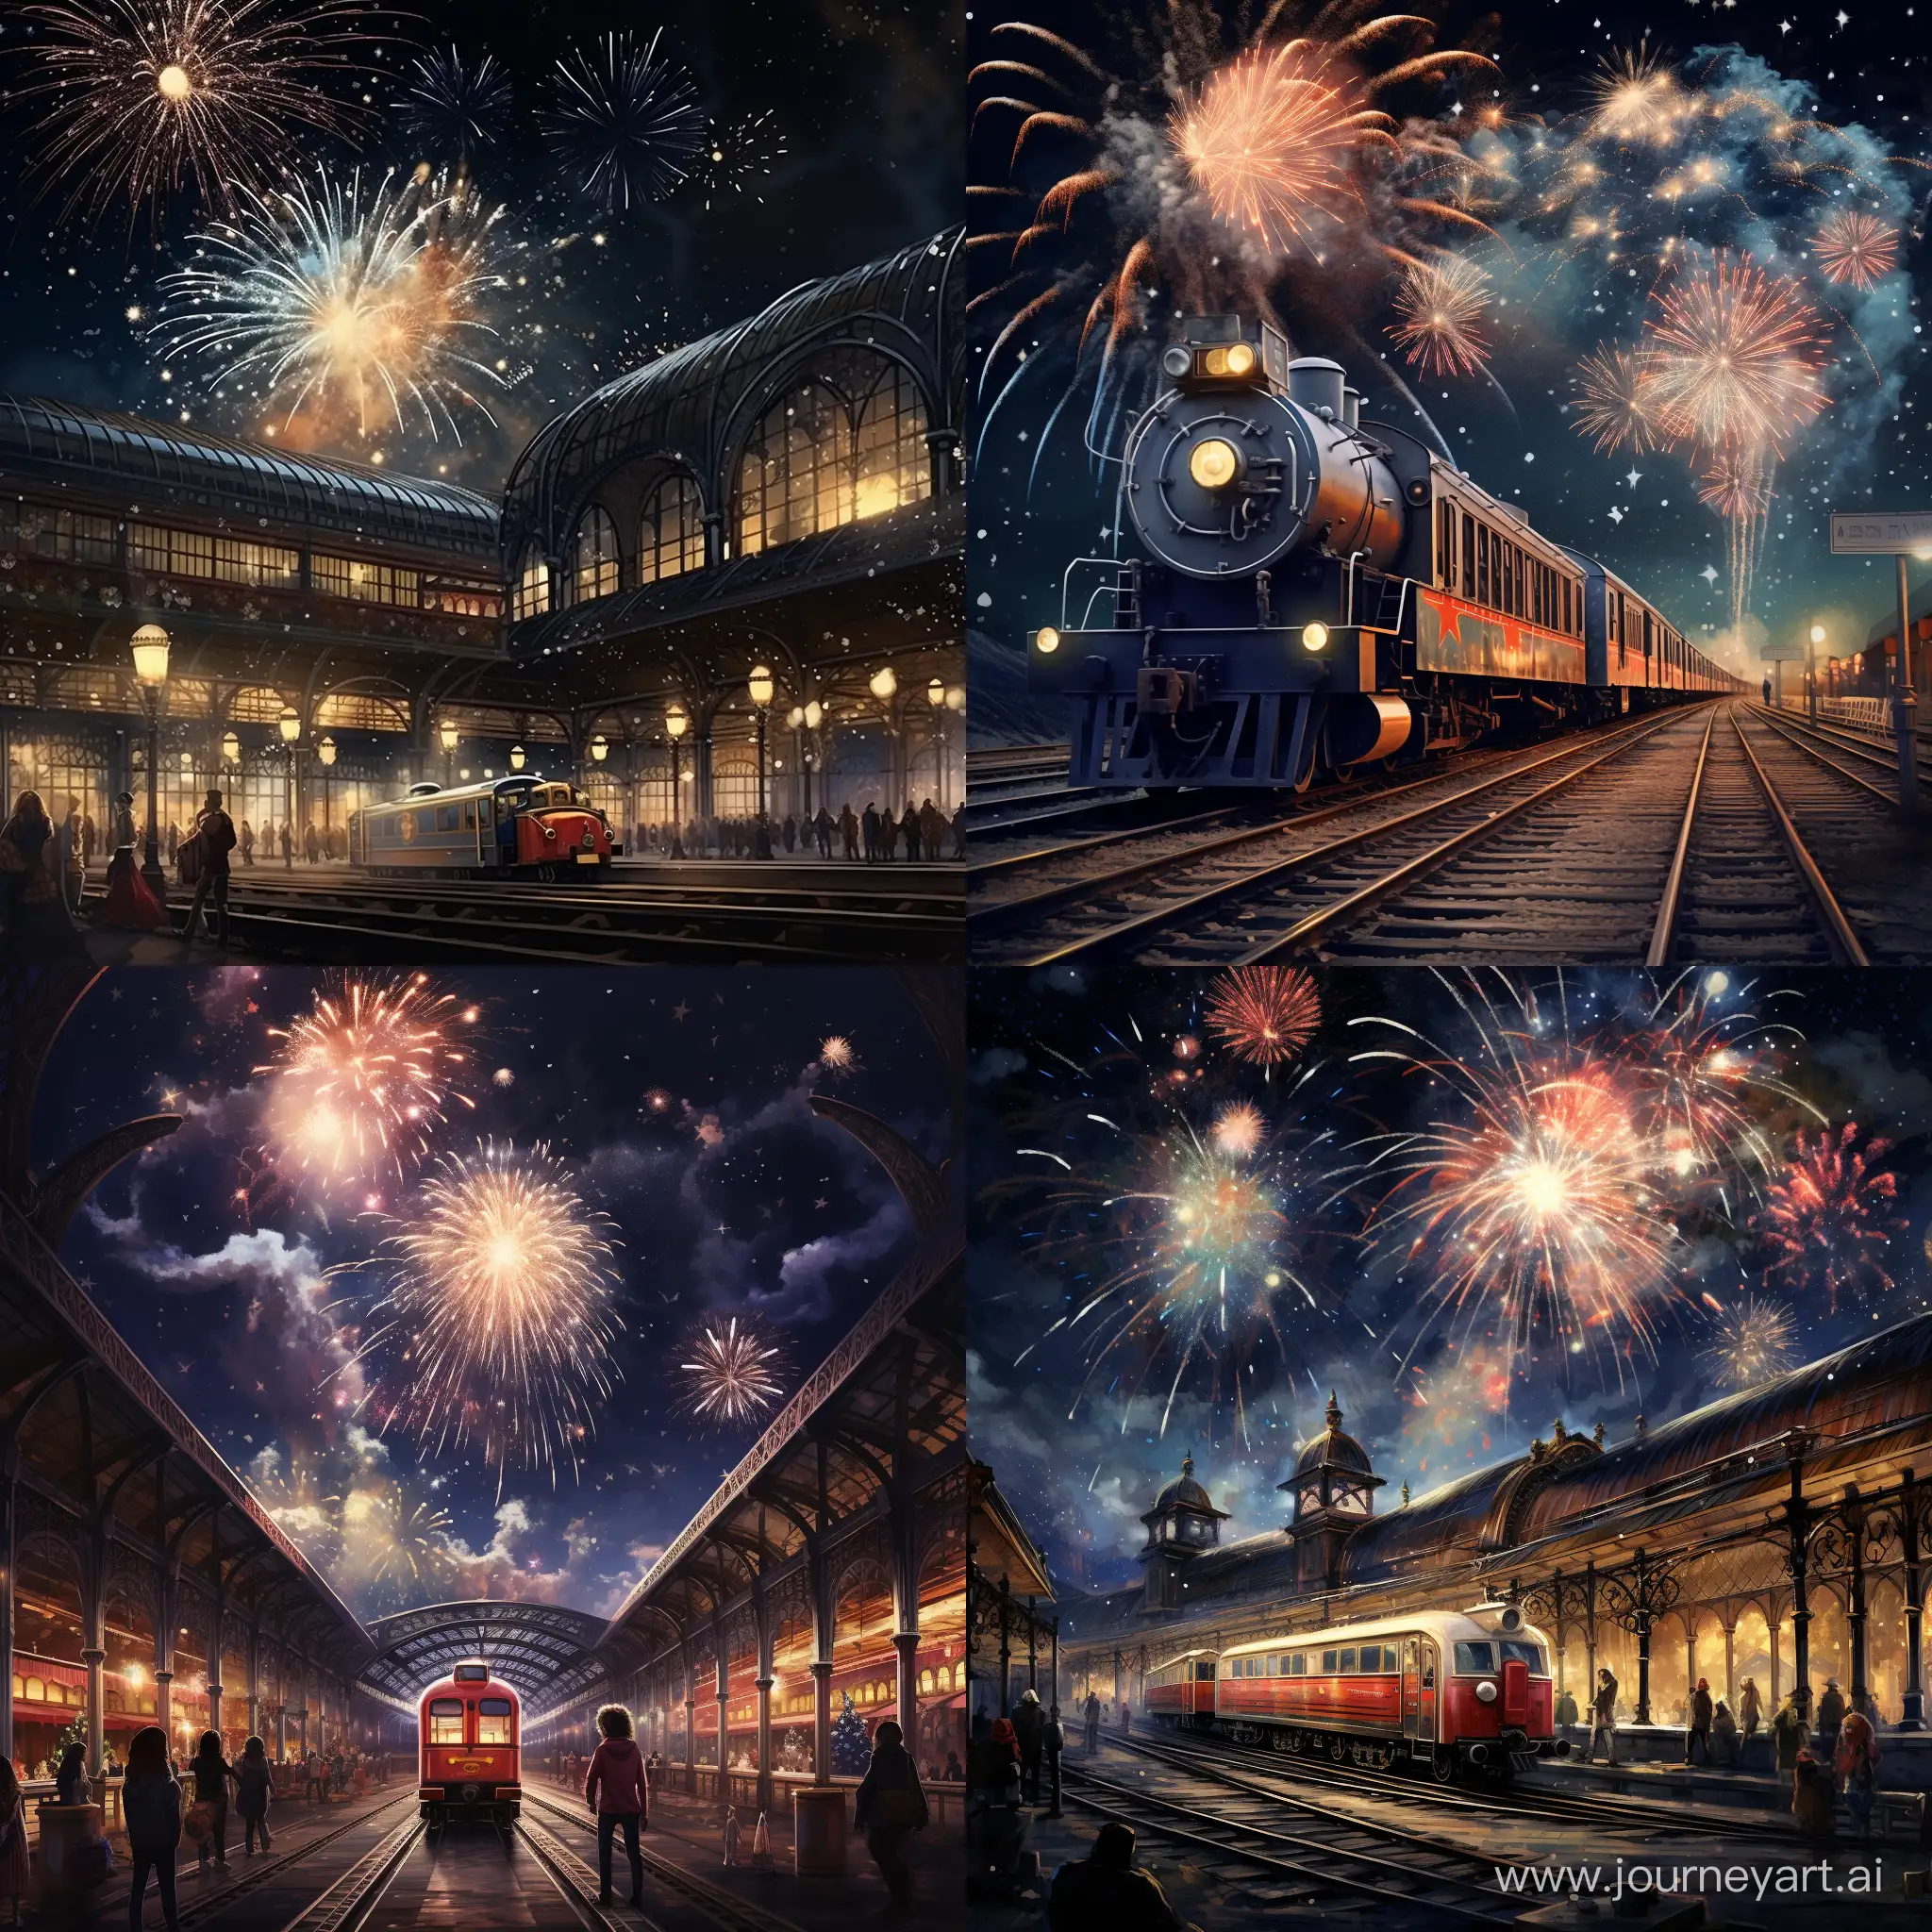 Nighttime-Celebration-at-the-Locomotive-Train-Station-with-Fireworks